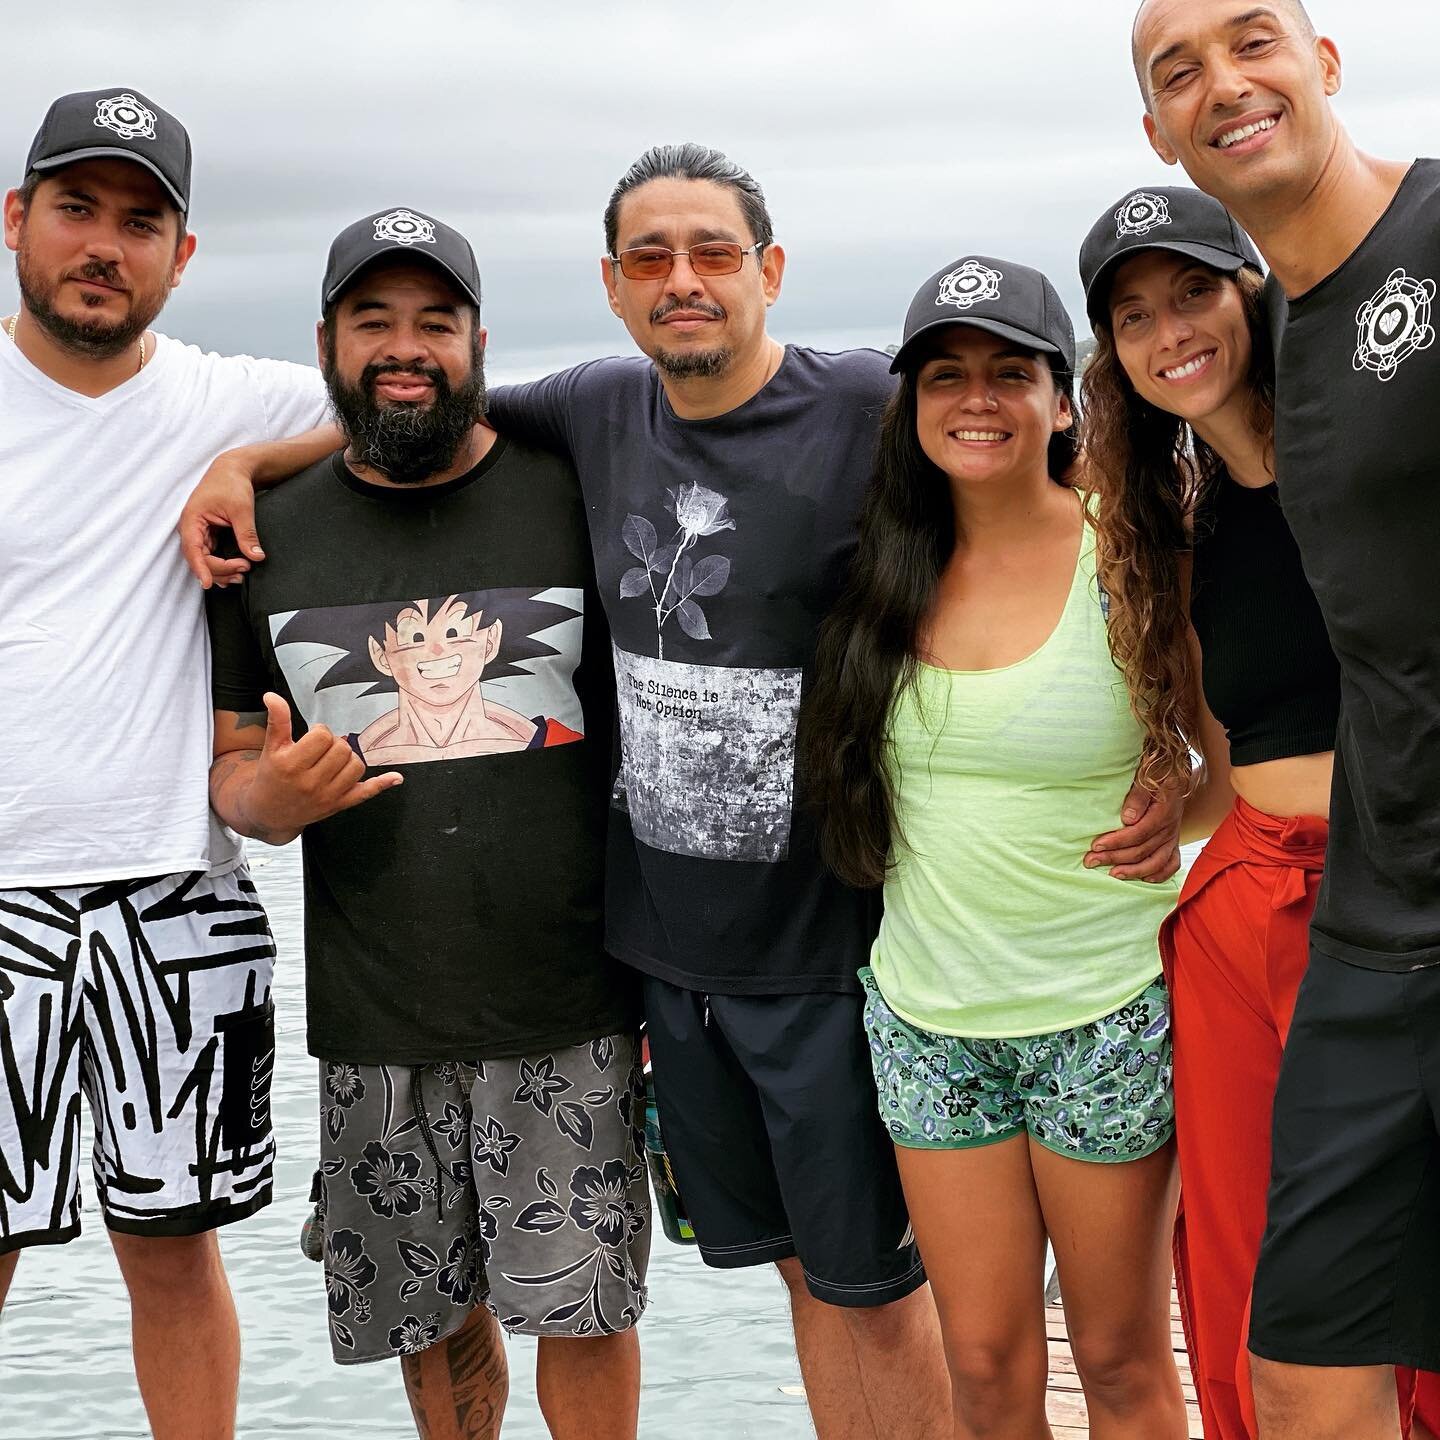 Meet our Mexican allies! 🇲🇽

We recently visited Mexico to plant seeds for the first international expression of Fuerza de Amor in Bacalar. 

Bacalar has been dealing with many challenges related to their community and the destruction and pollution